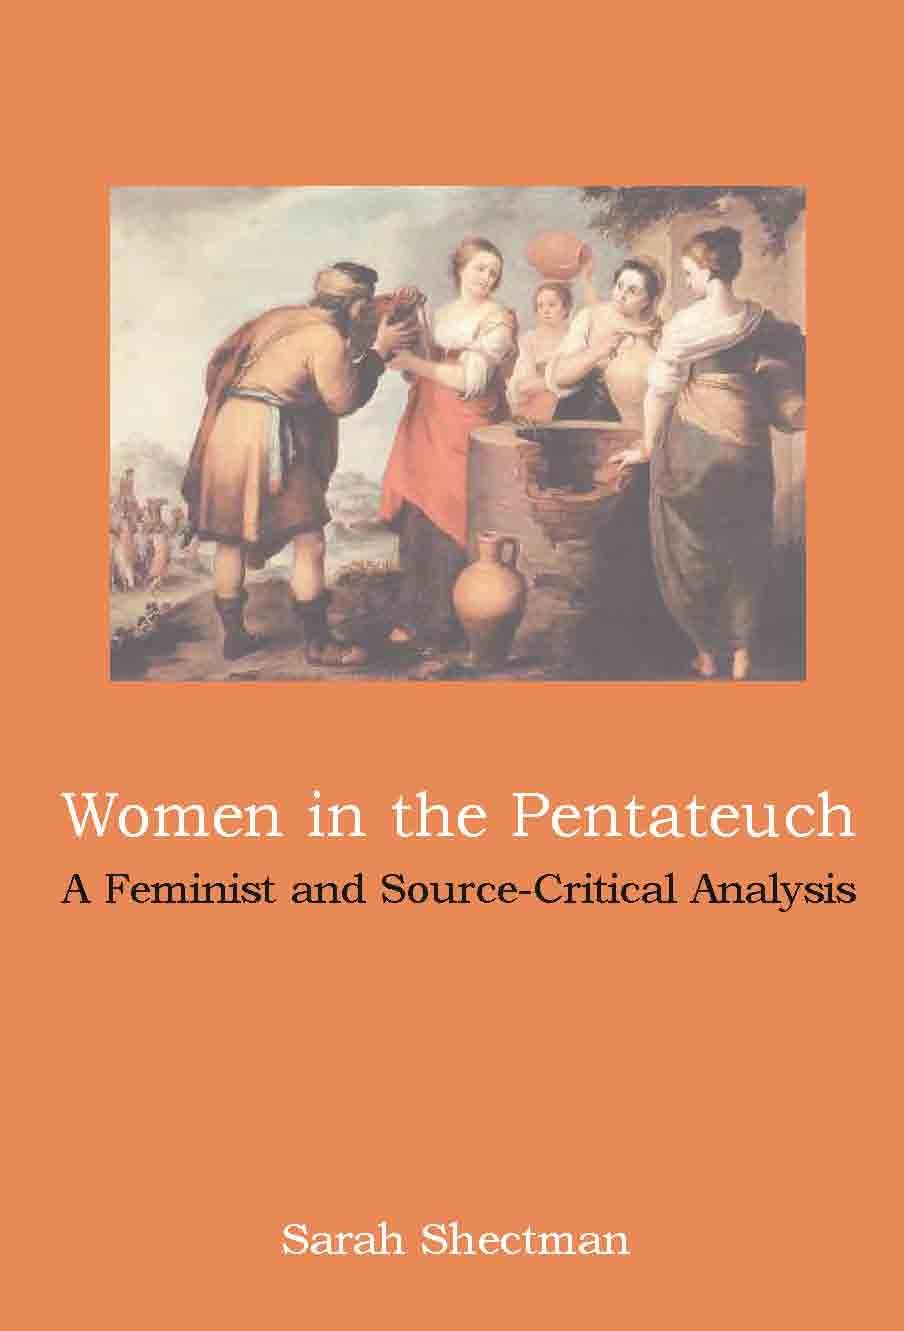 RBL 02/2011 Shectman, Sarah Women in the Pentateuch: A Feminist and Source- Critical Analysis Hebrew Bible Monographs 23 Sheffield: Sheffield Phoenix, 2009. Pp. xiii + 204. Hardcover. $85.00. ISBN 9781906055721.